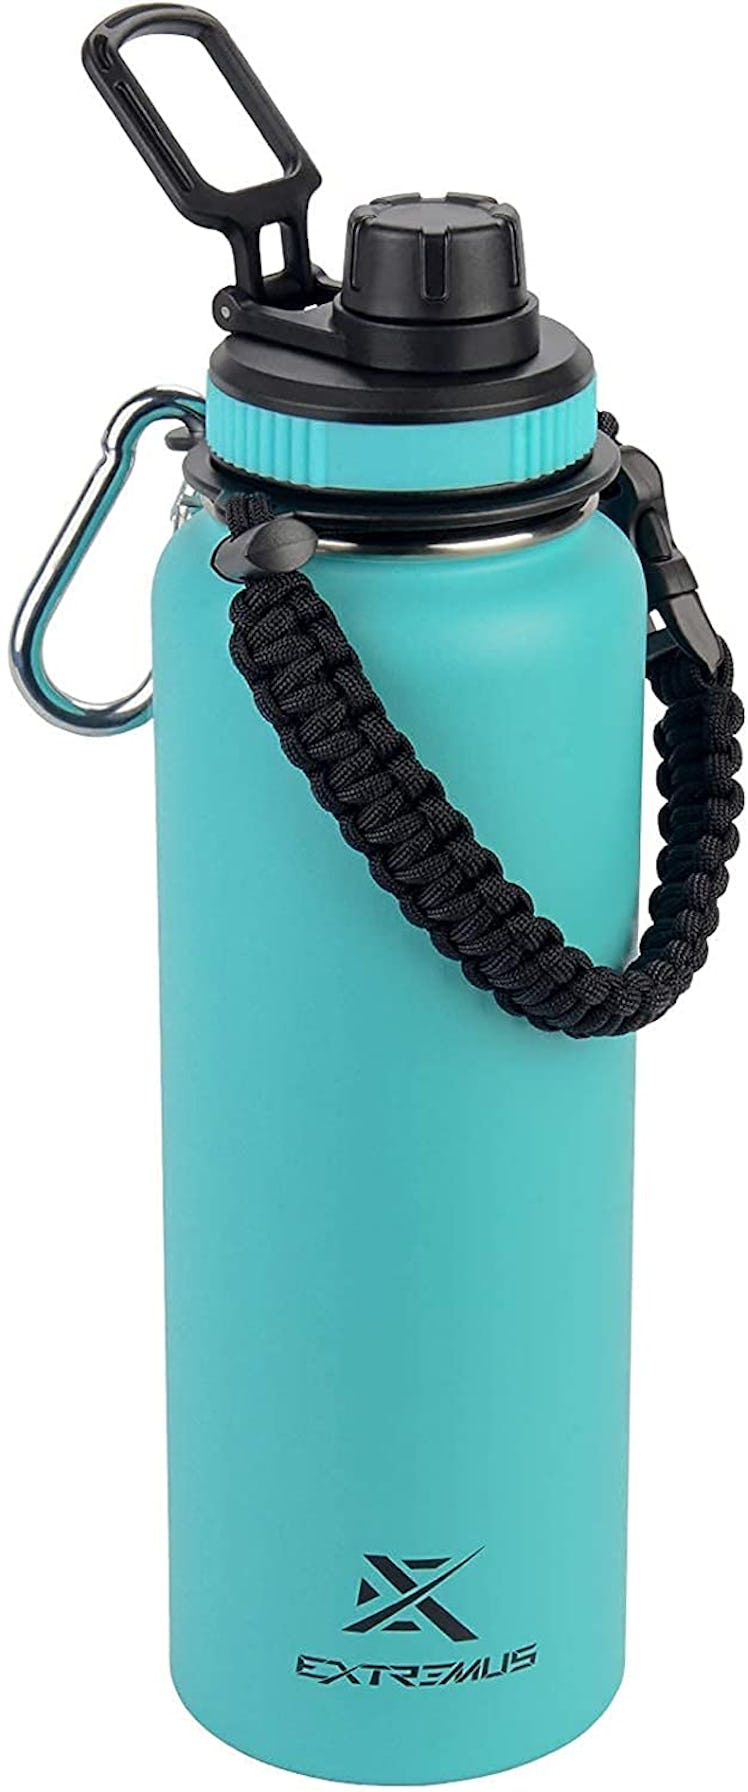 Extremus Stainless Steel Water Bottle